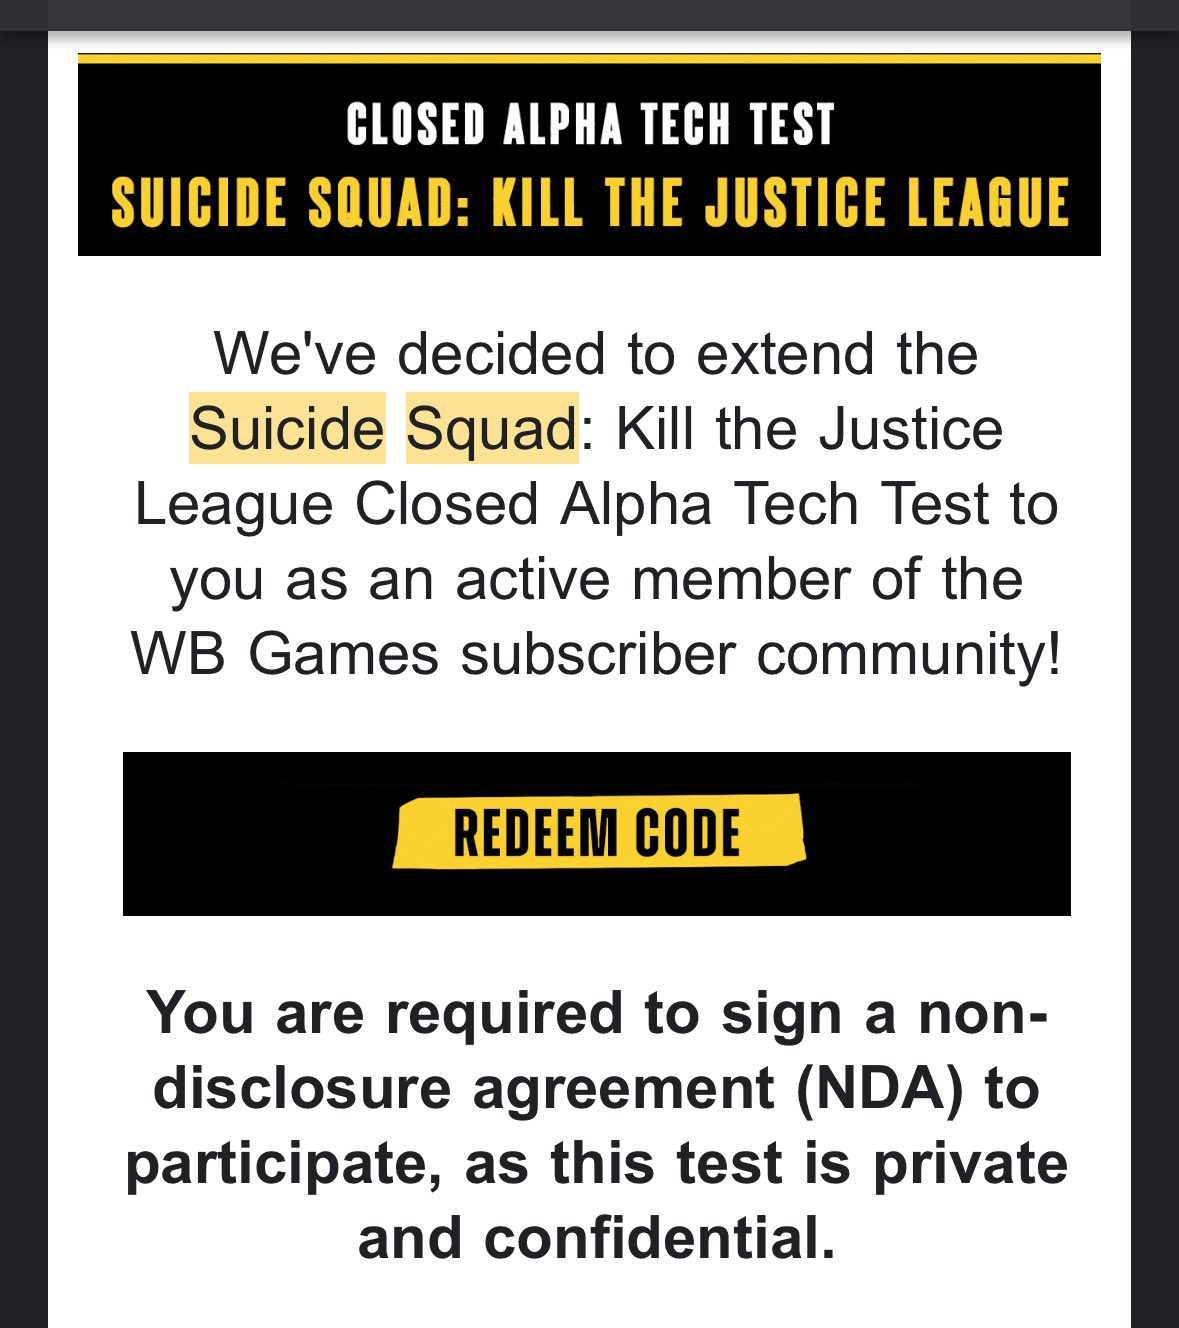 𝓘𝓽𝓼 𝓙𝓾𝓼𝓽 𝓜𝓮 𝓤𝓬𝓮  𝒥𝑒𝓎 𝒰𝓈𝑜 𝐹𝒶𝓃 on X: It looks like the  closed alpha tech test beta for Suicide Squad Kill The Justice League  requires NDA it just means you